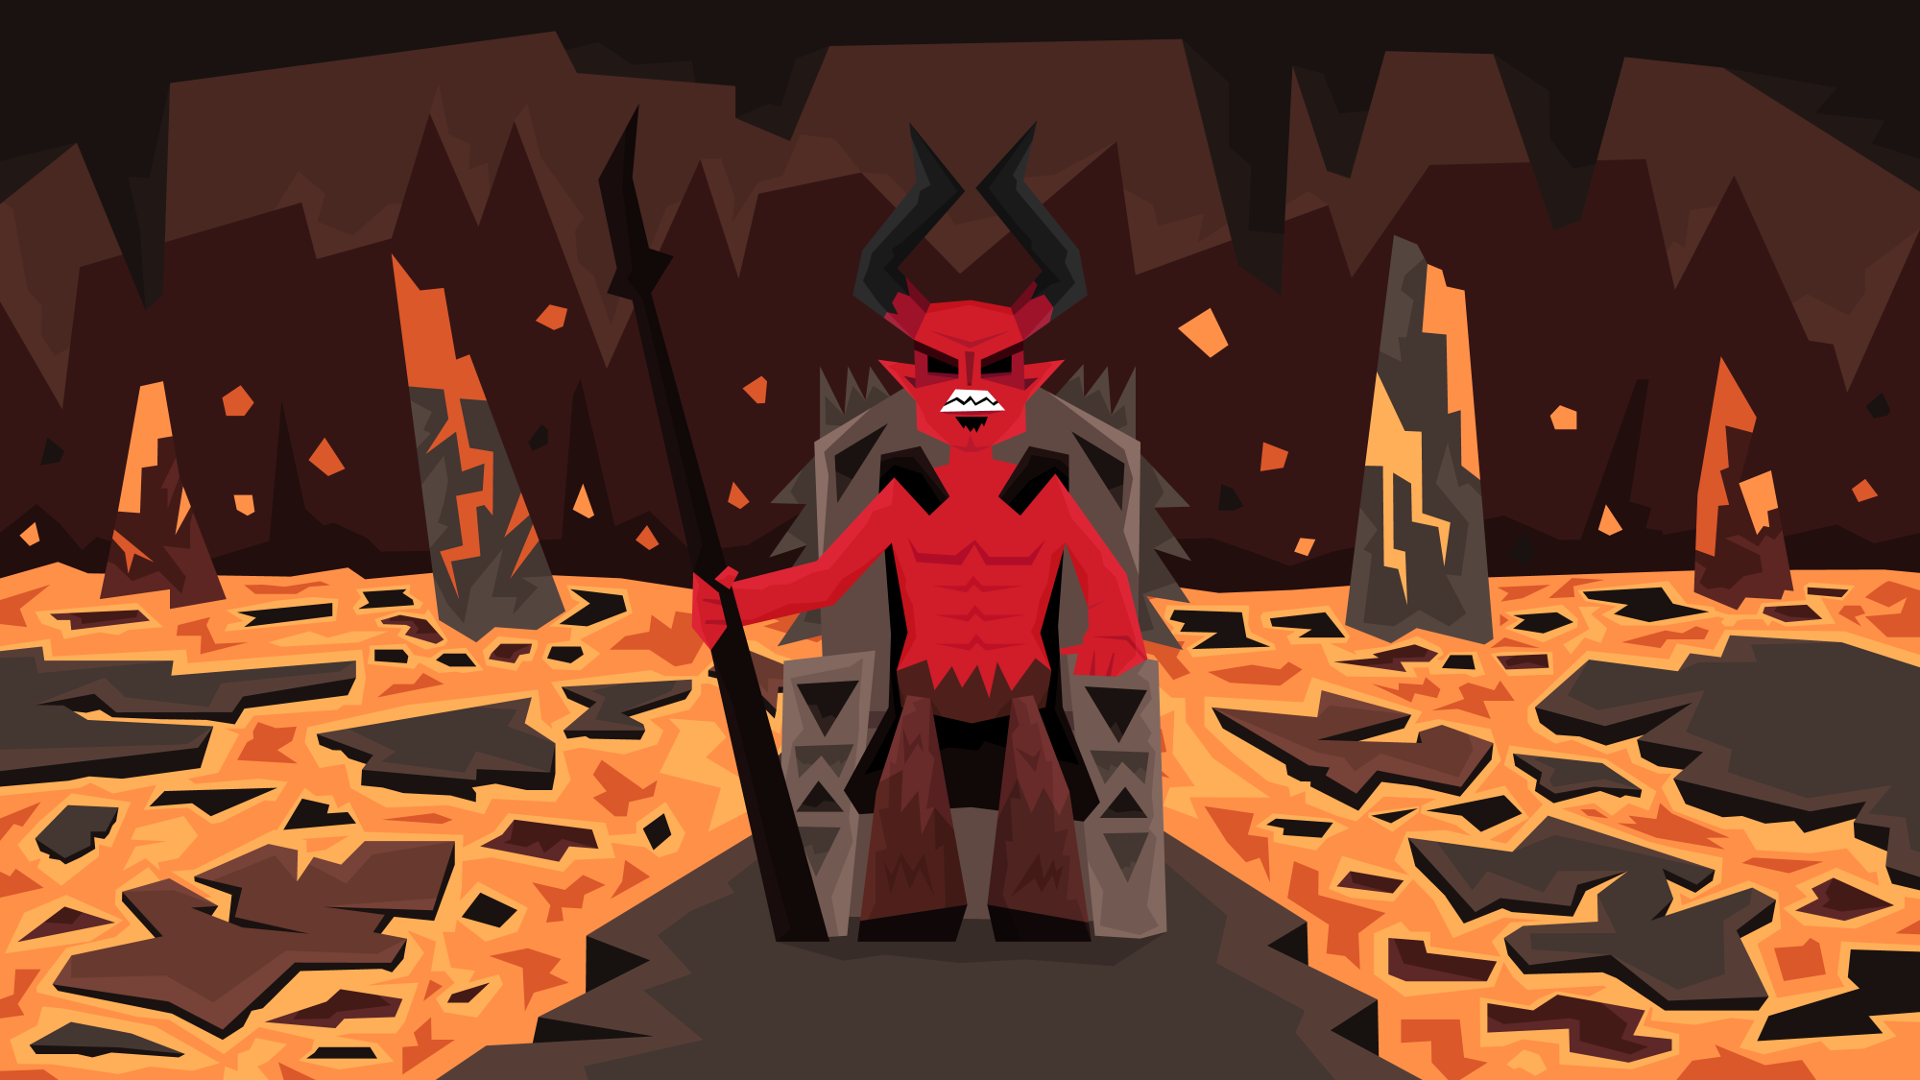 The Demon King sitting on his throne surrounded by lava.